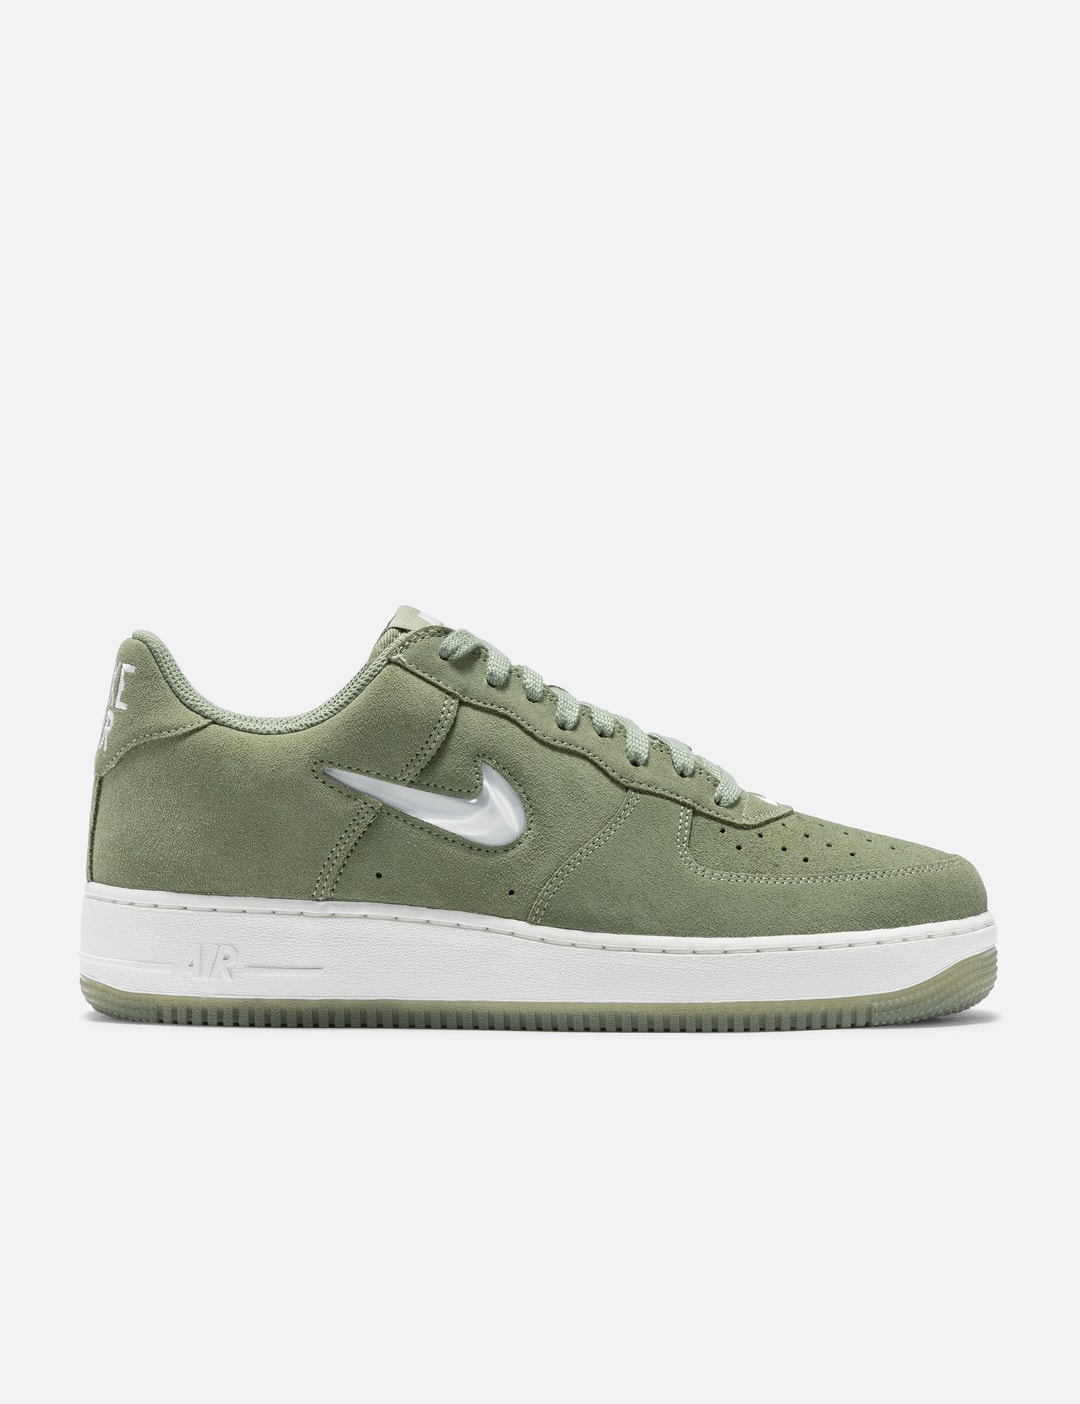 Nike - NIKE AIR FORCE 1 LOW RETRO | HBX - Globally Curated Fashion and ...